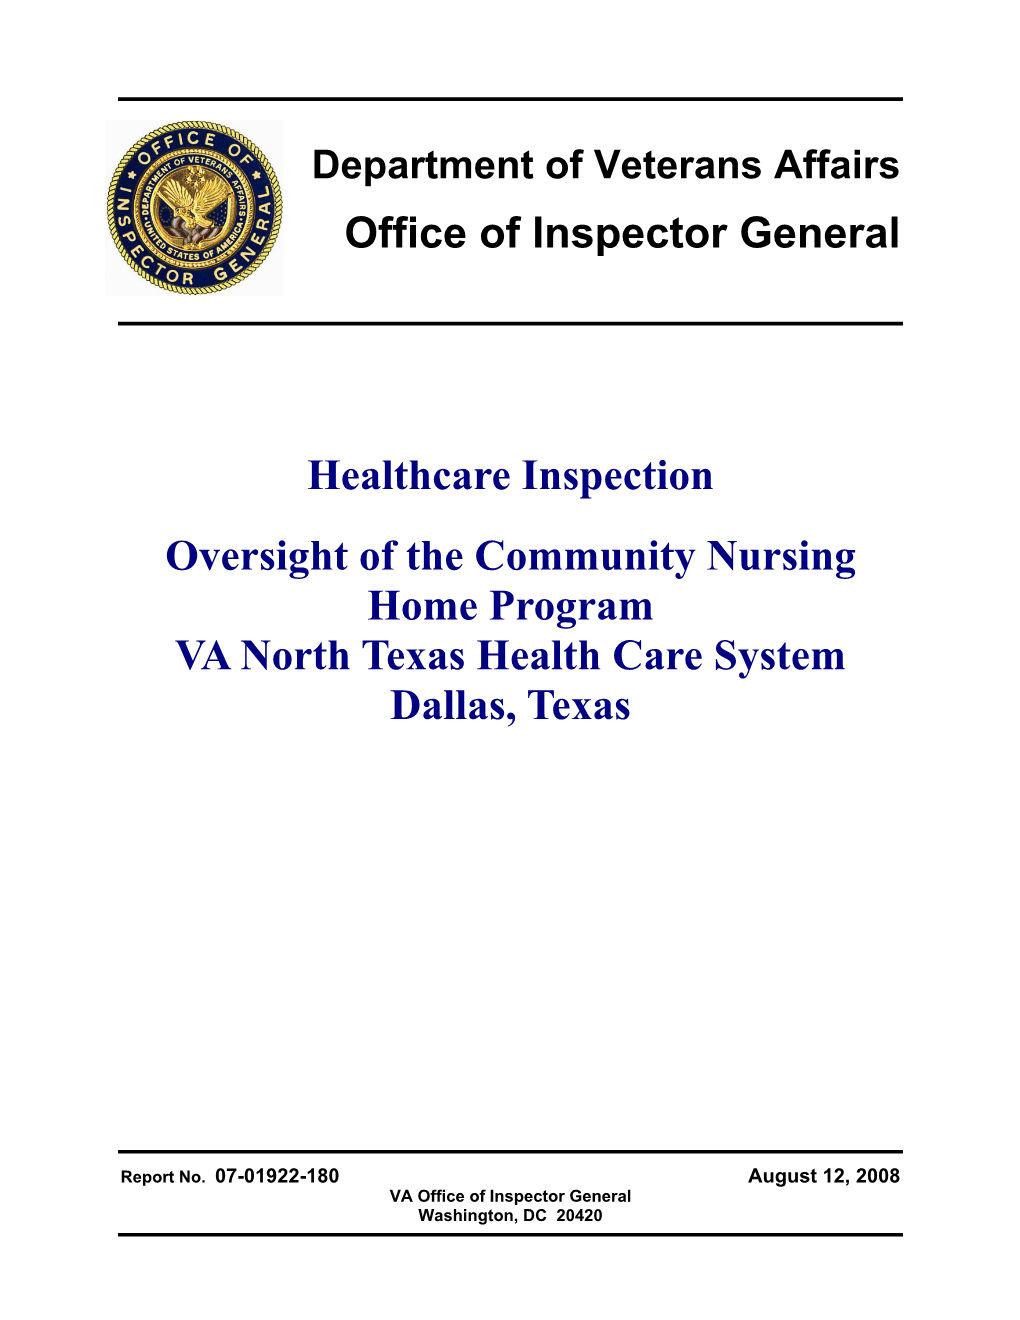 Healthcare Inspection Oversight of the Community Nursing Home